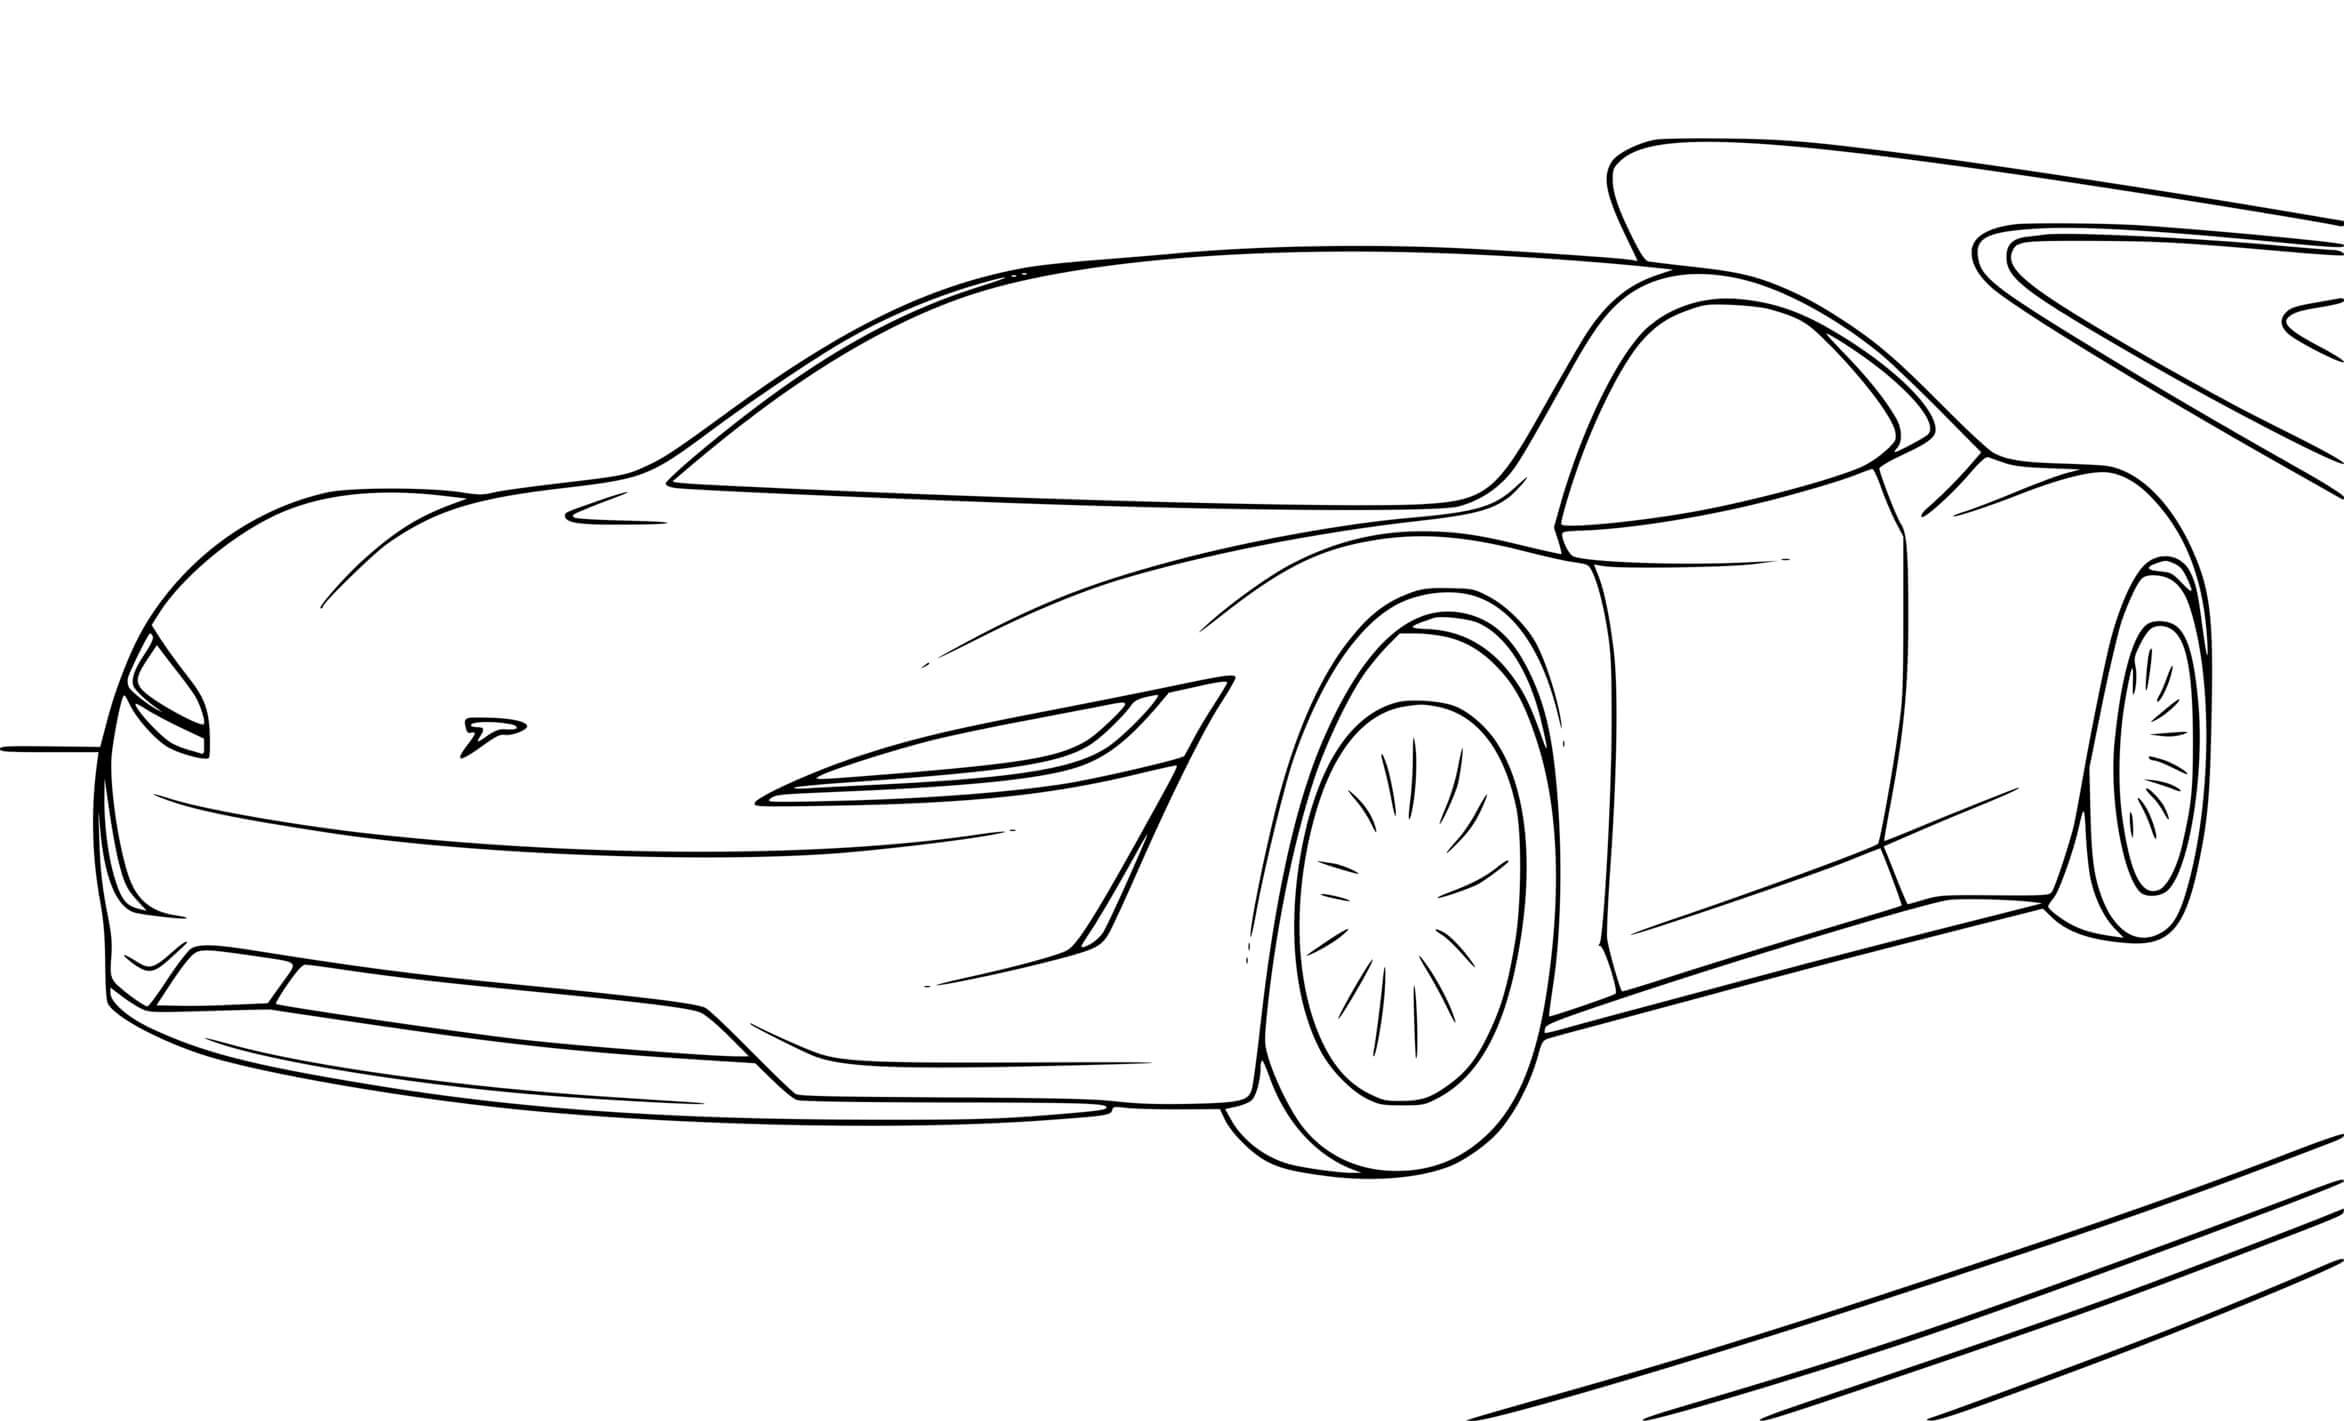 Voiture Tesla Roadster Coloring Page